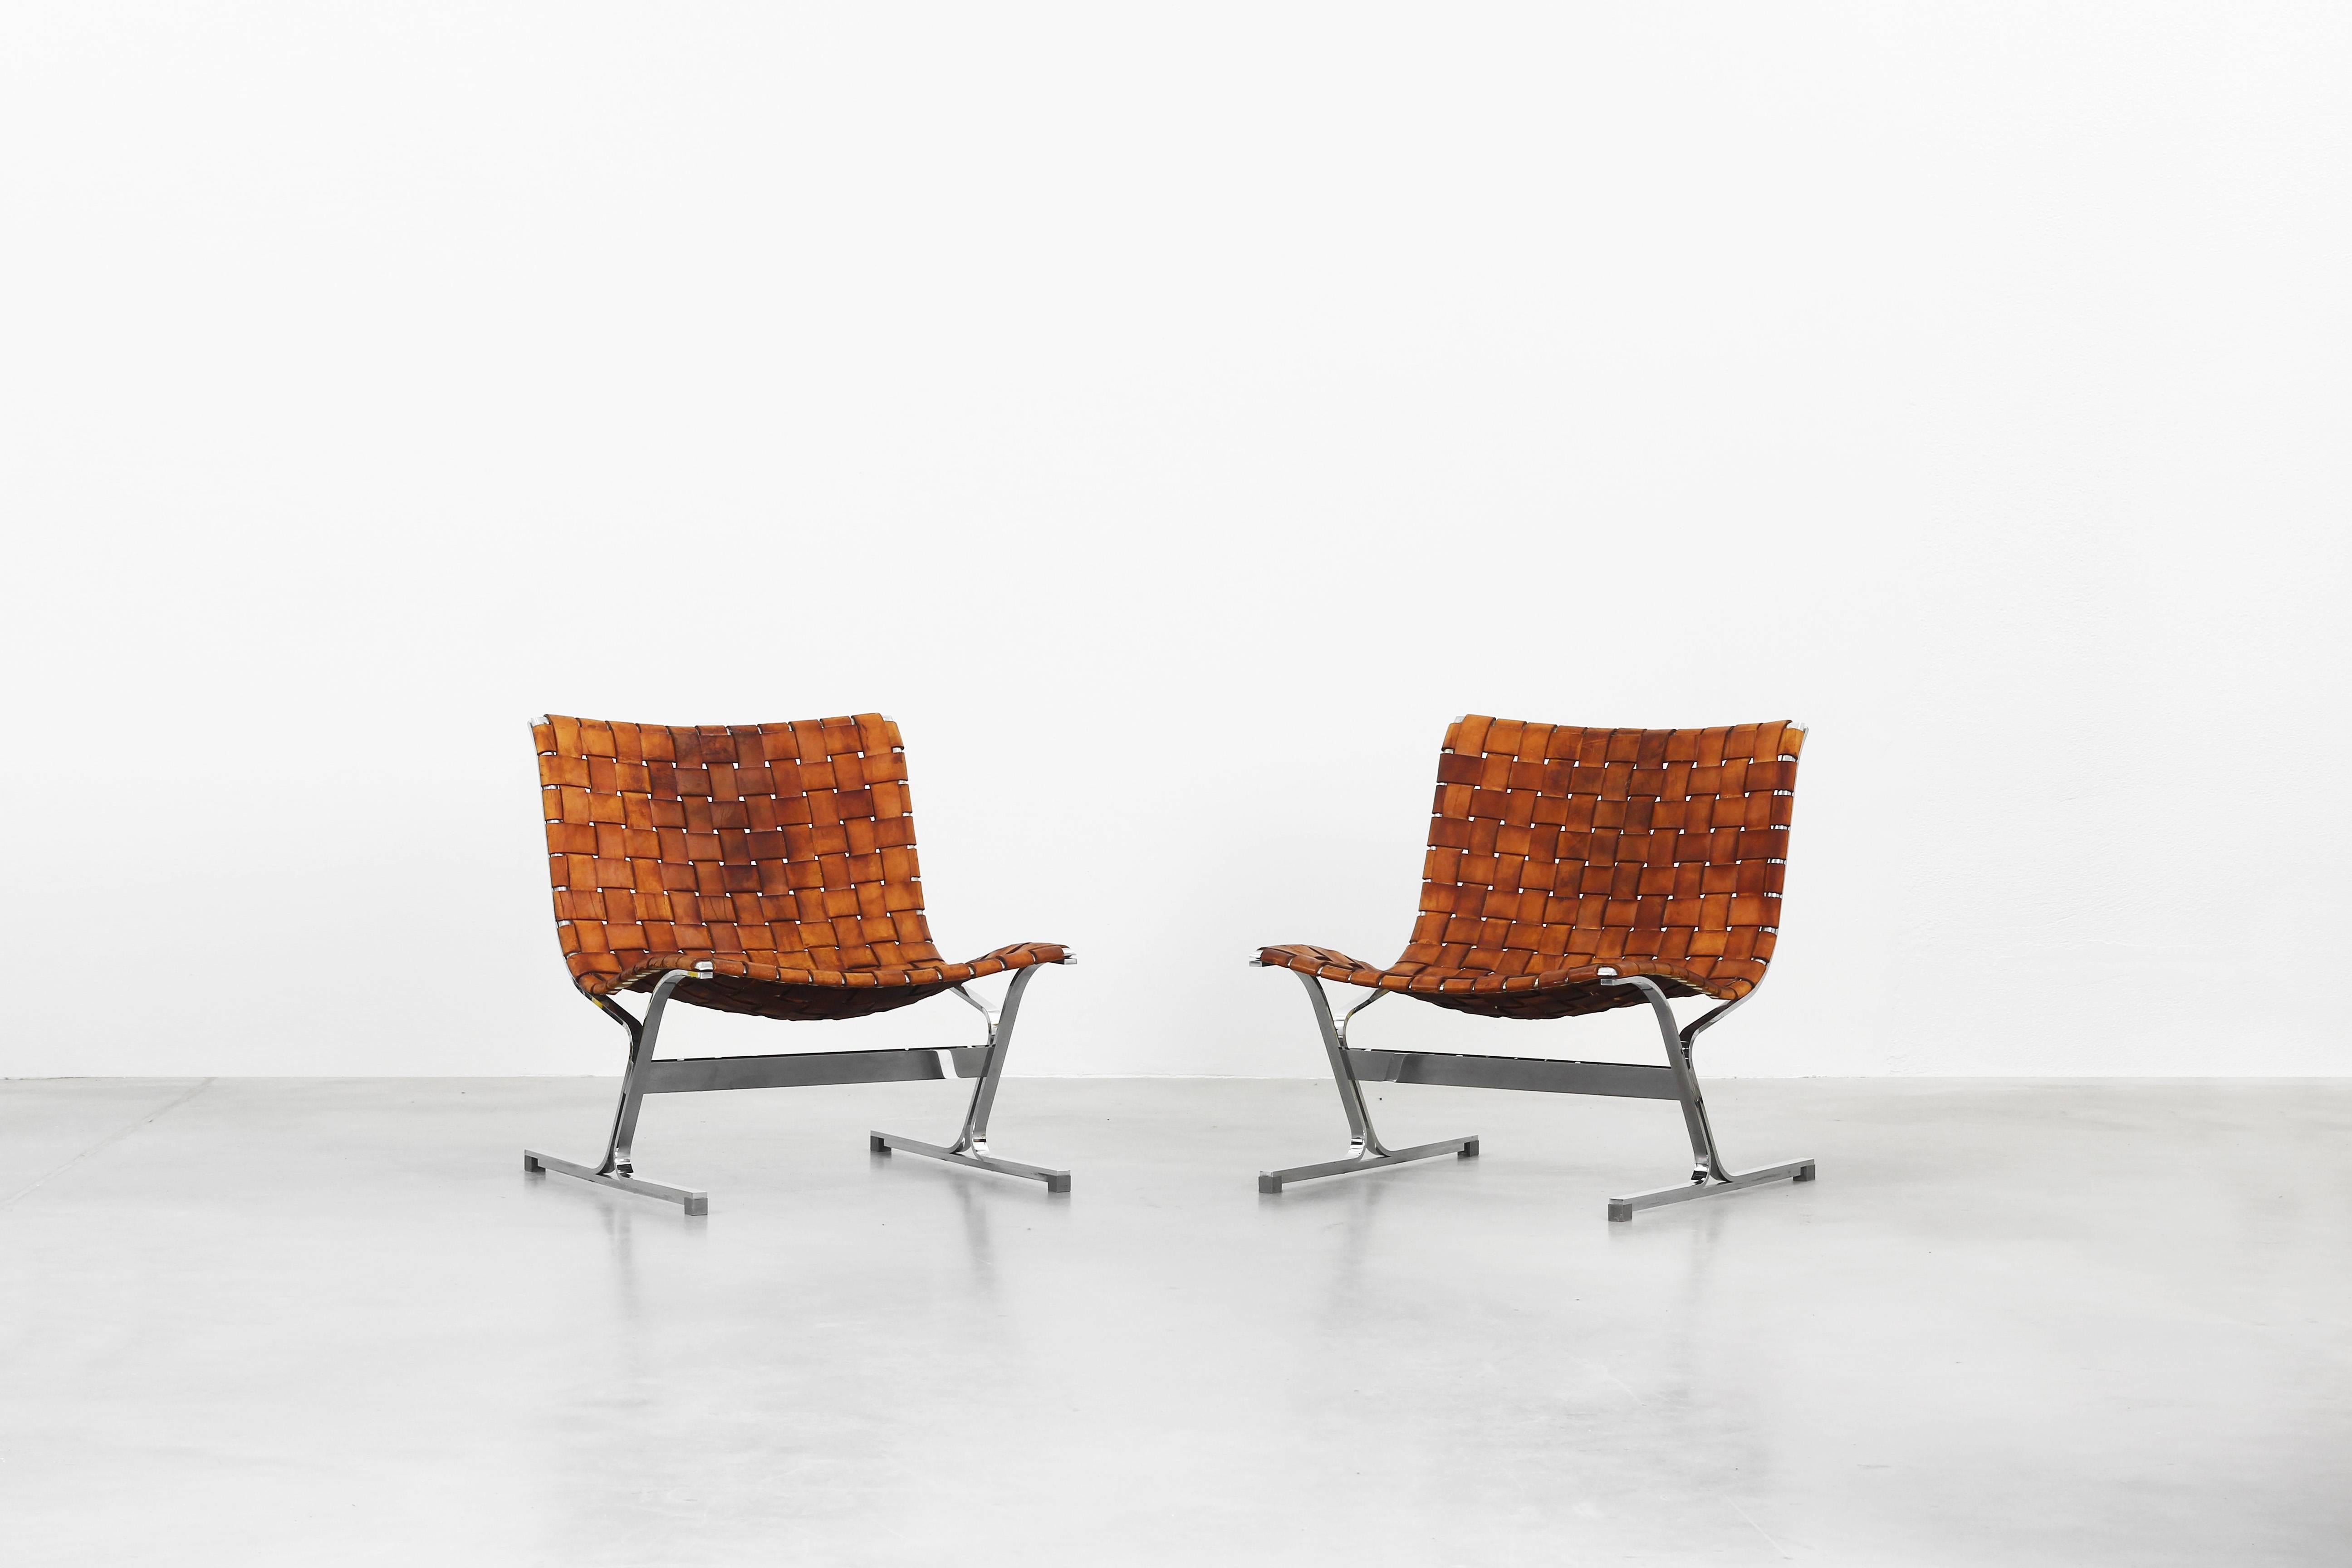 A pair of beautiful lounge chairs designed by Ross Littell for ICF, Mod. PLR 1, in 1960s. Both chairs are in a good used condition. The leather is with a beautiful patina and the chromed steel frame is in an excellent condition.

Please do not